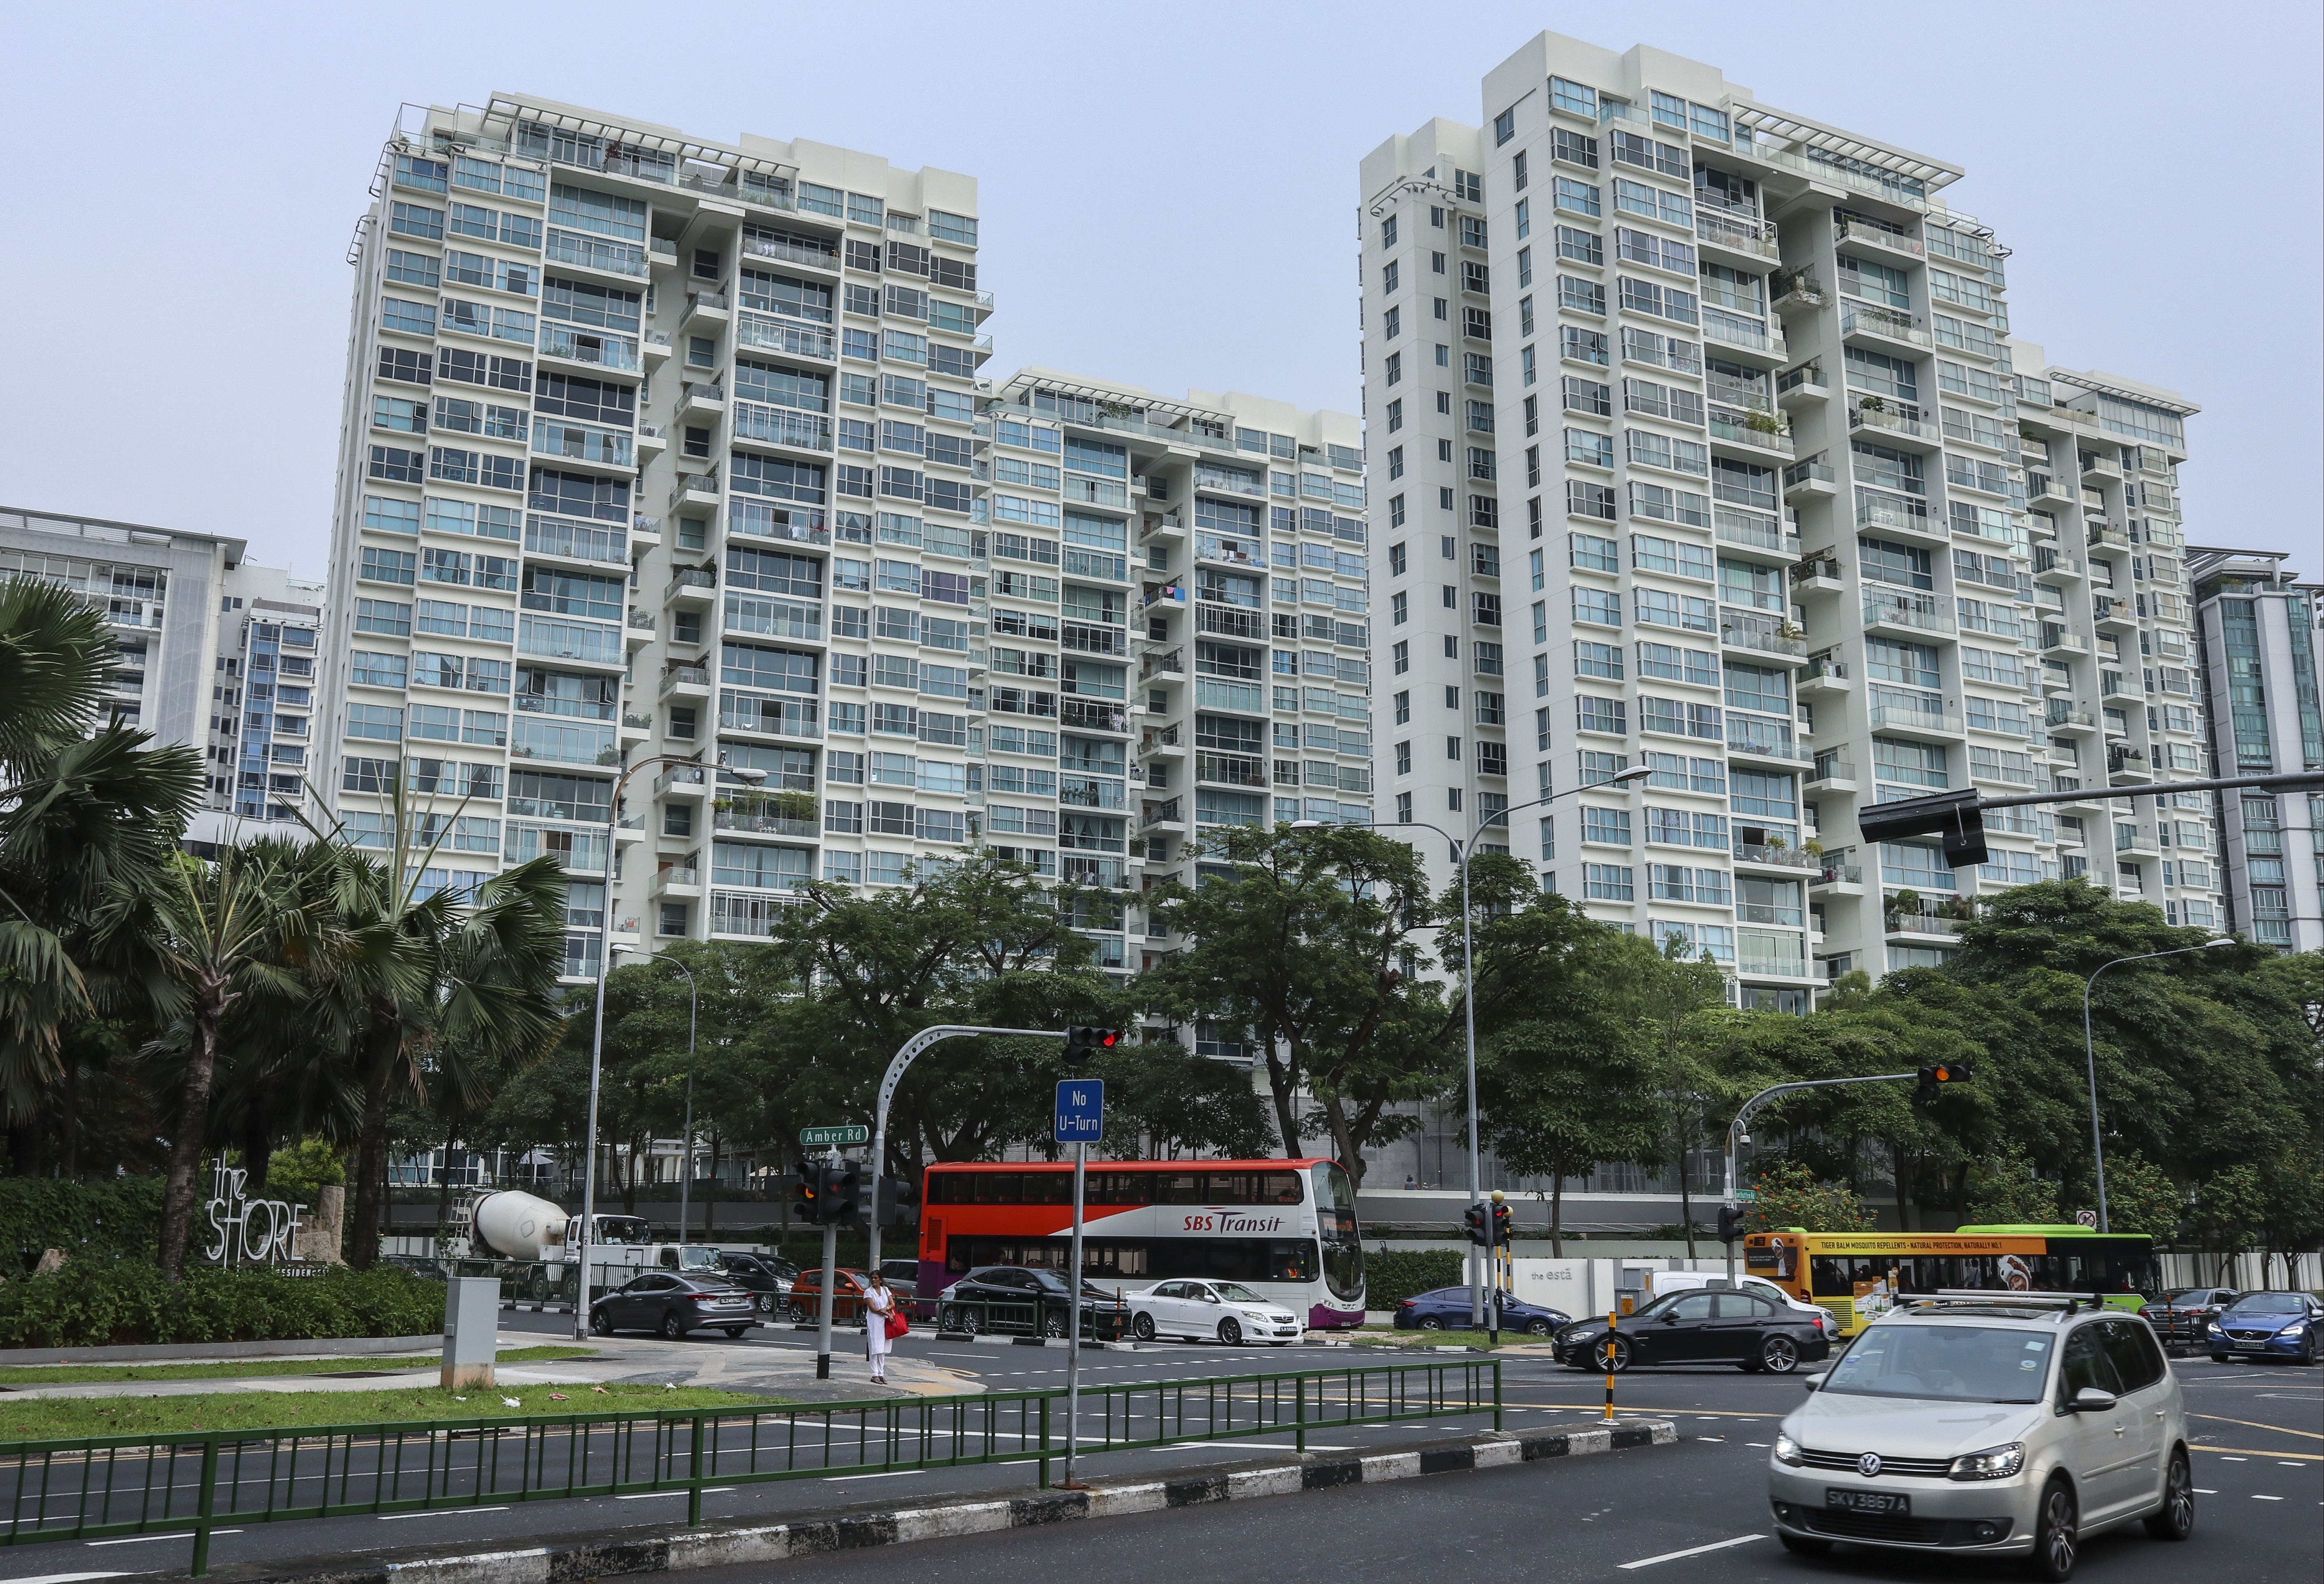 Residential buildings in Singapore, where some Chinese developers have been involved in the building of public housing projects and private condominiums. Photo: Roy Issa